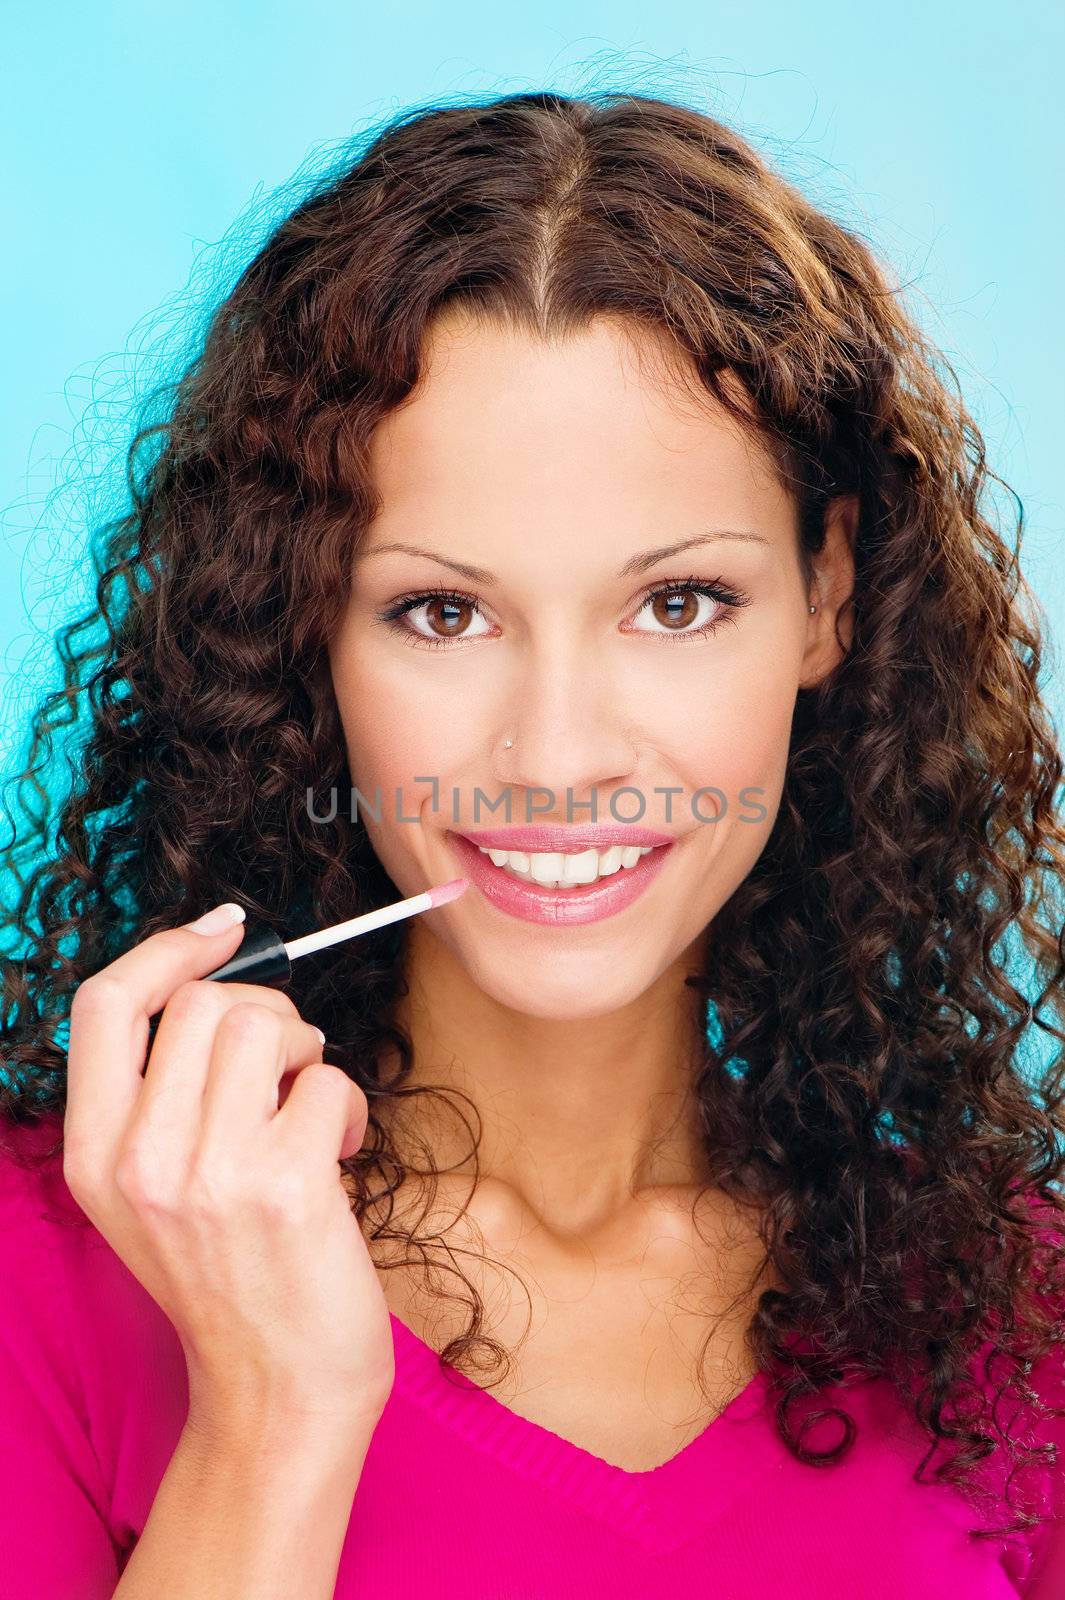 Pretty smiled woman putting lipstick on her lips